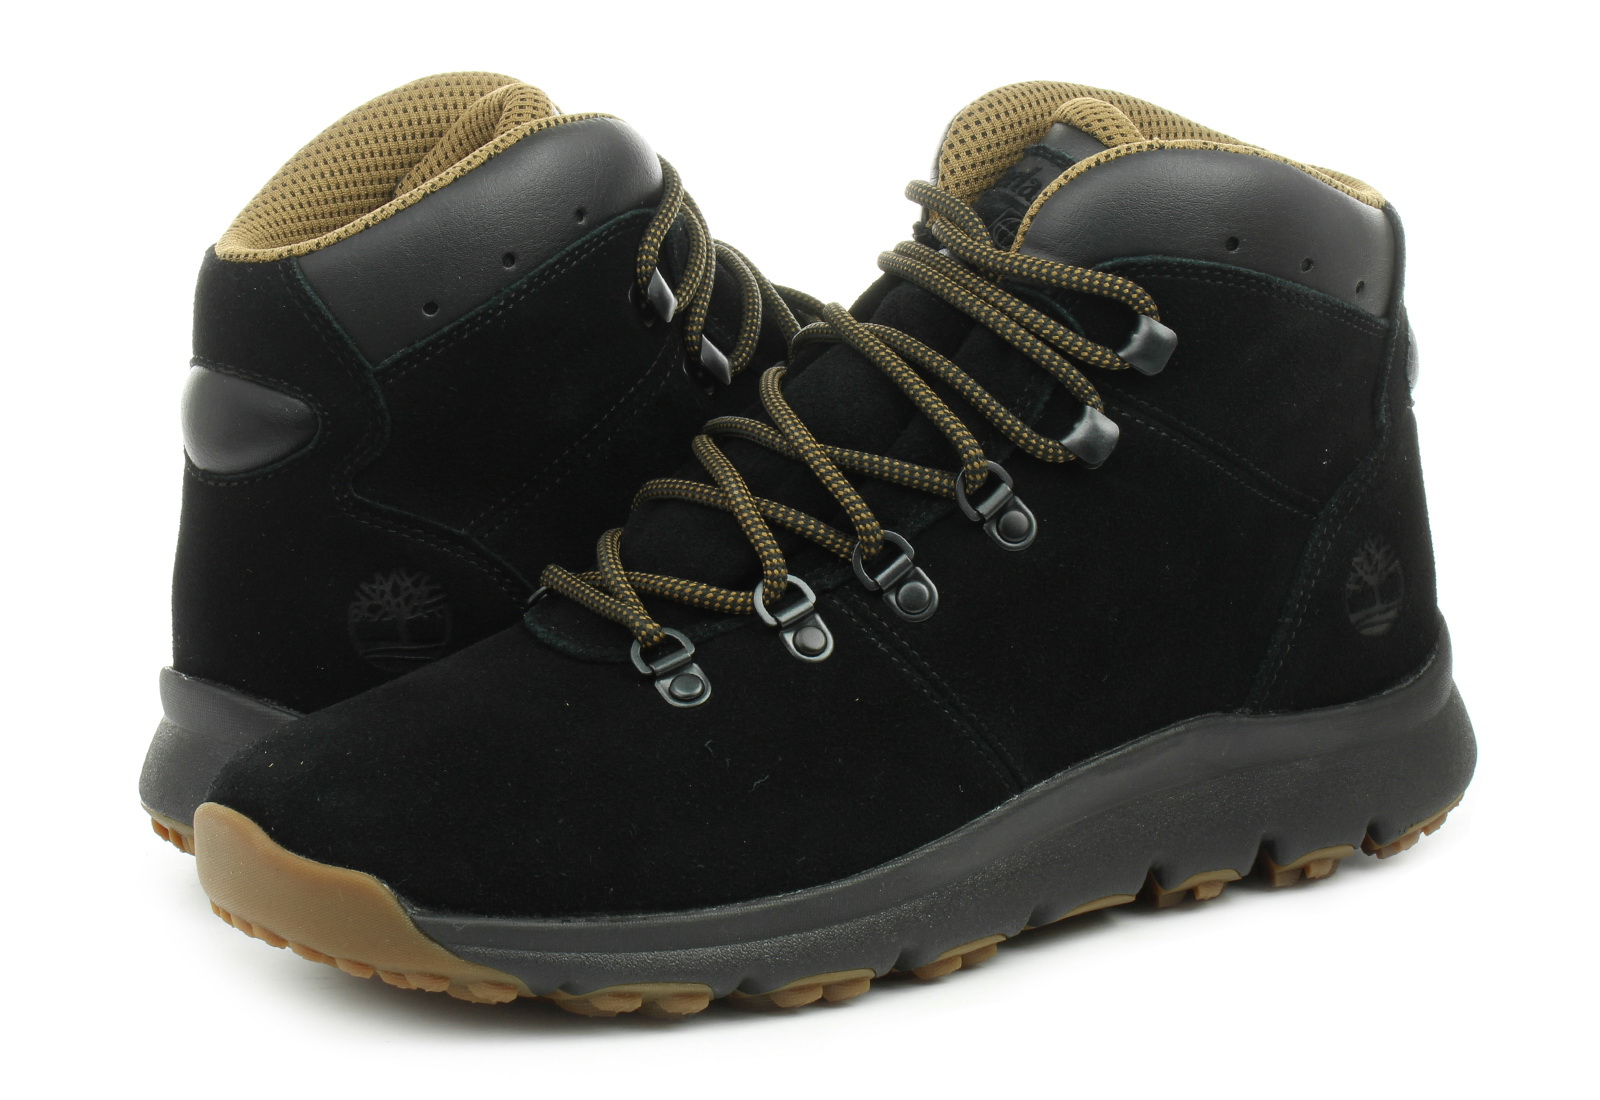 Timberland Hikers - World Hiker Mid - A1QFL-BLK - Online shop for sneakers,  shoes and boots